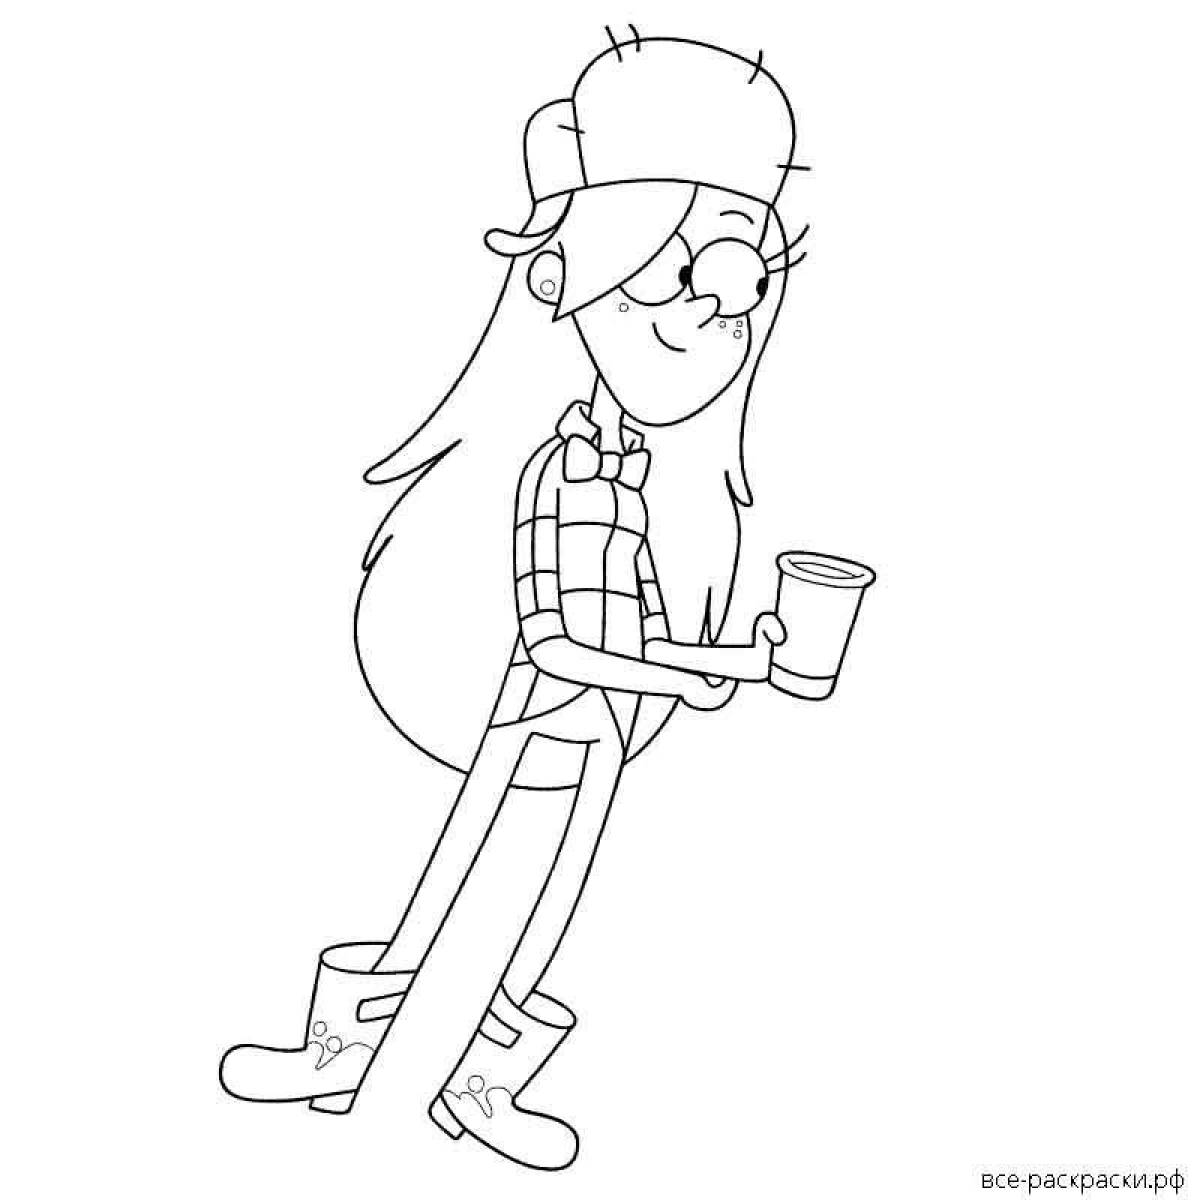 Wendy's live coloring page